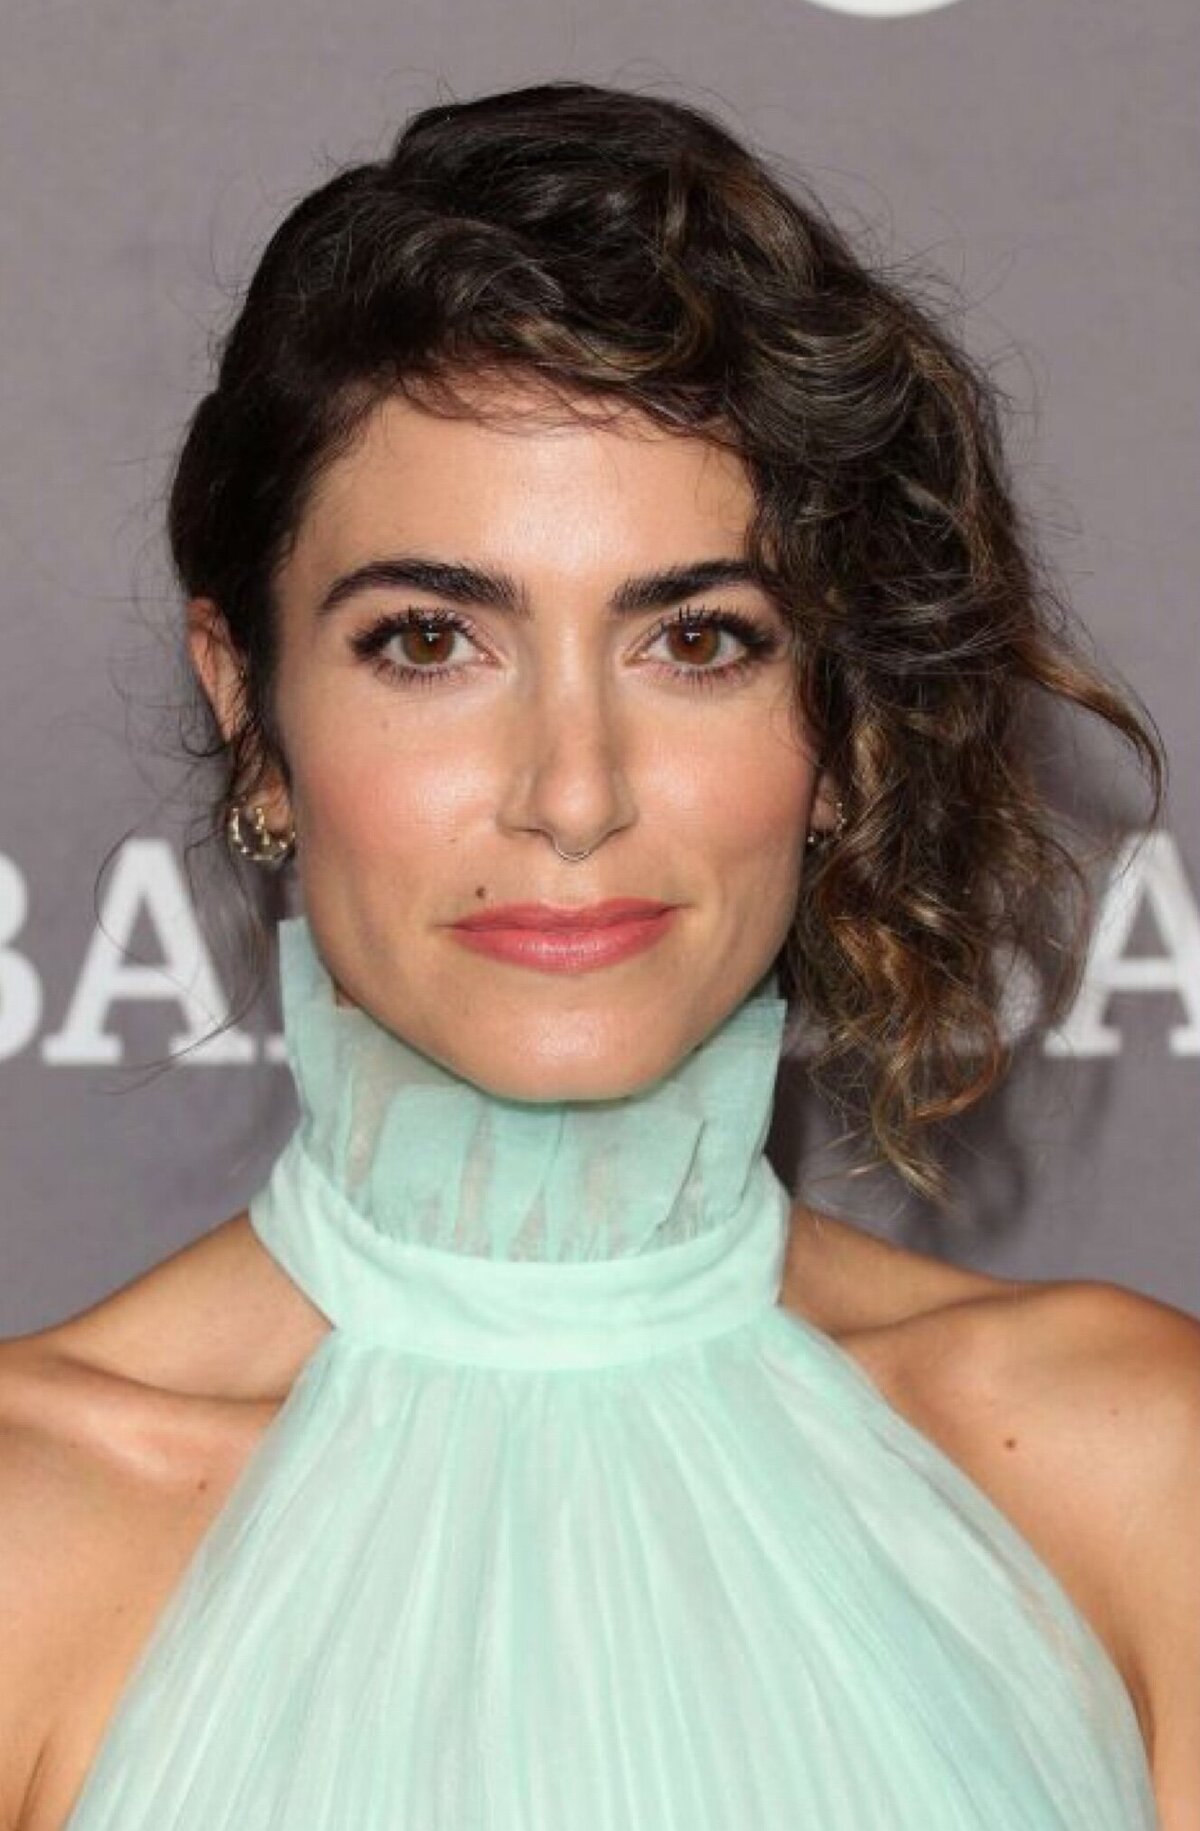 Nikki Reed at the Baby2Baby Gala wearing a mint green dress and neutral makeup